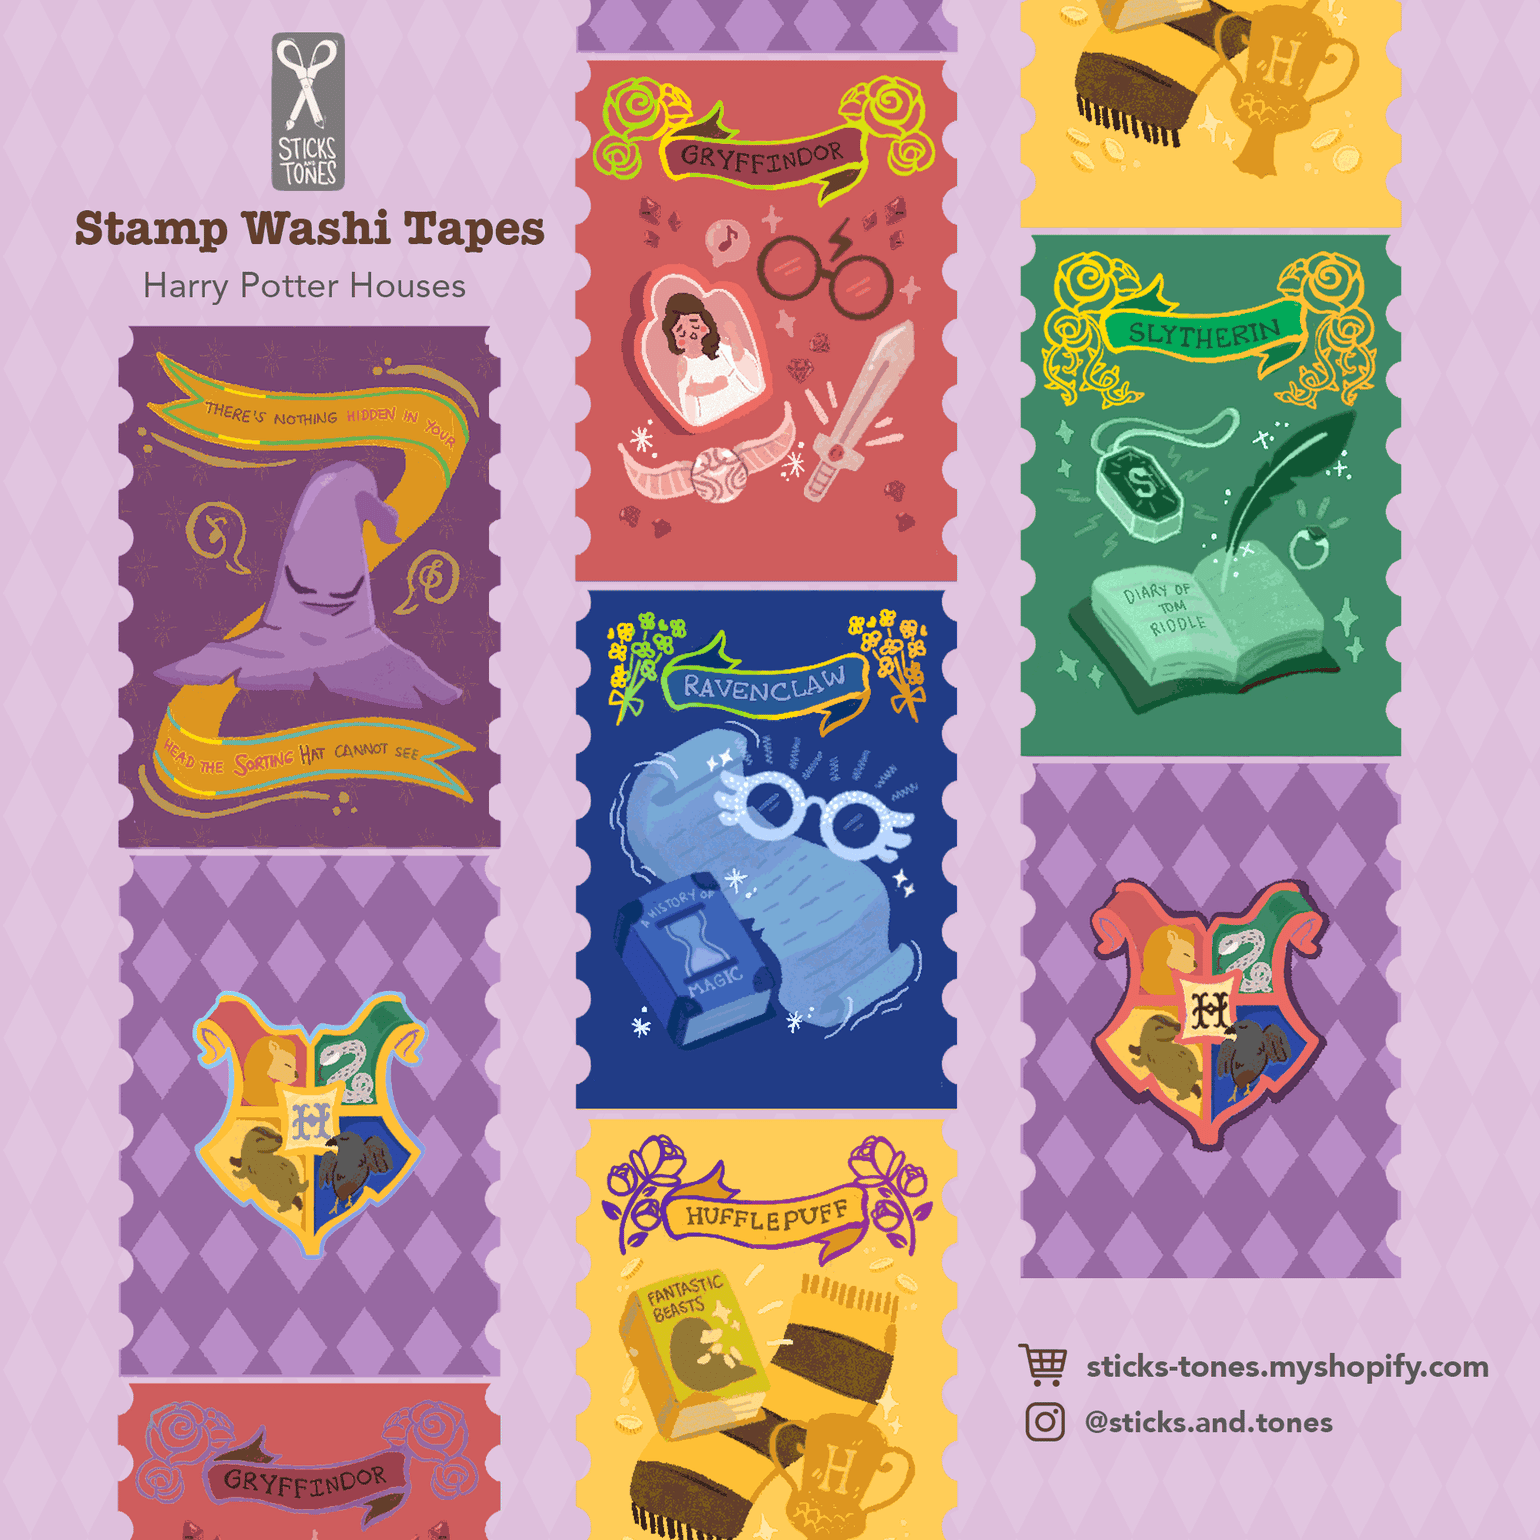 Harry Potter Houses Stamp Washi Tape